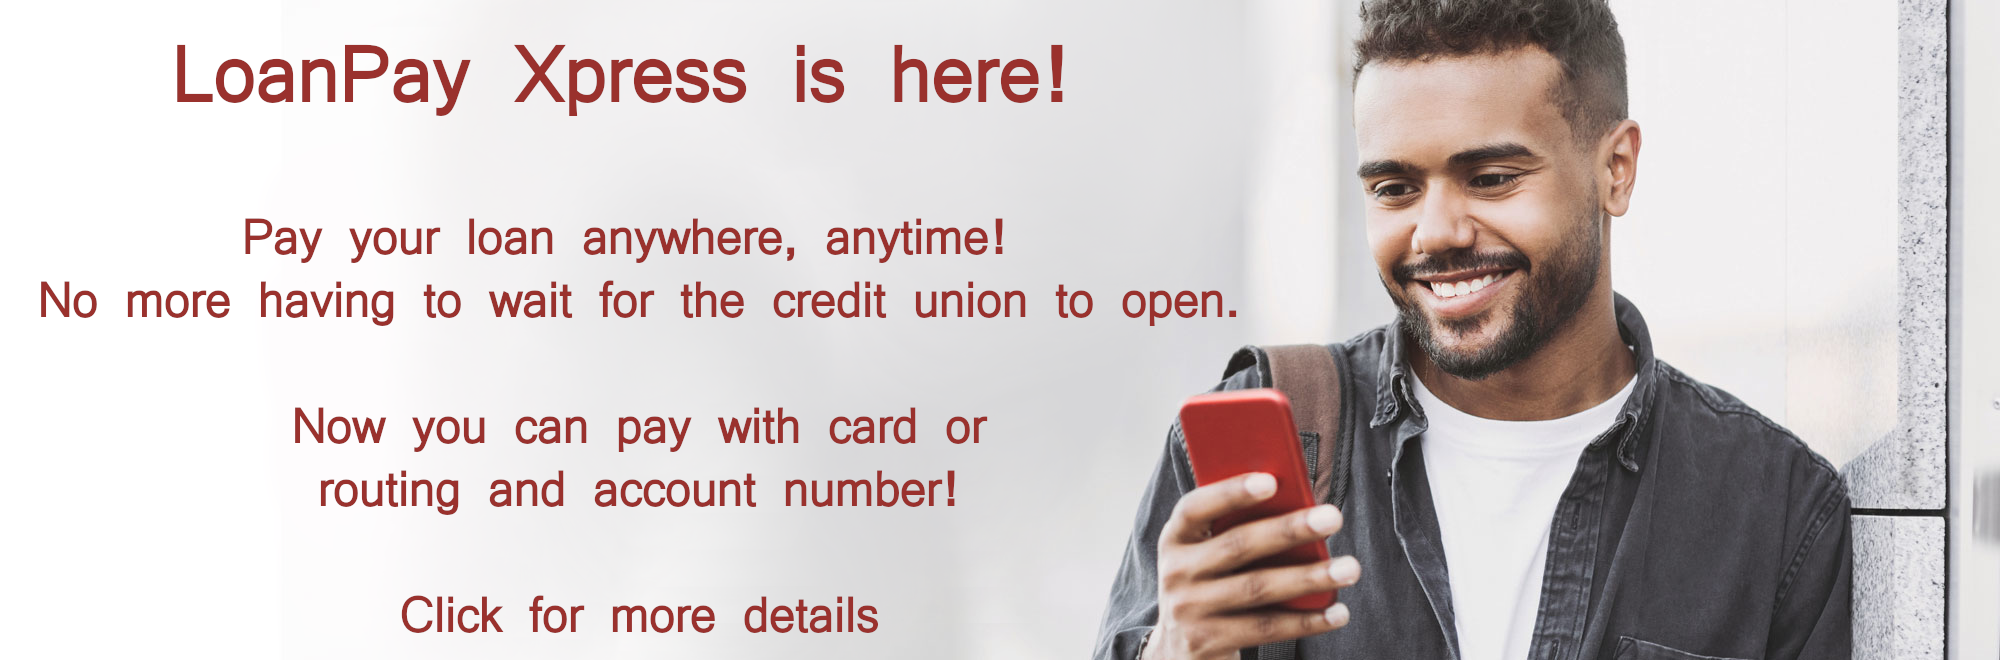 LoanPay Xpress is here! Pay your loan anywhere, anytime! No more having to wait for the credit union to open. Now you can pay with card or routing and account number! Click for more details 